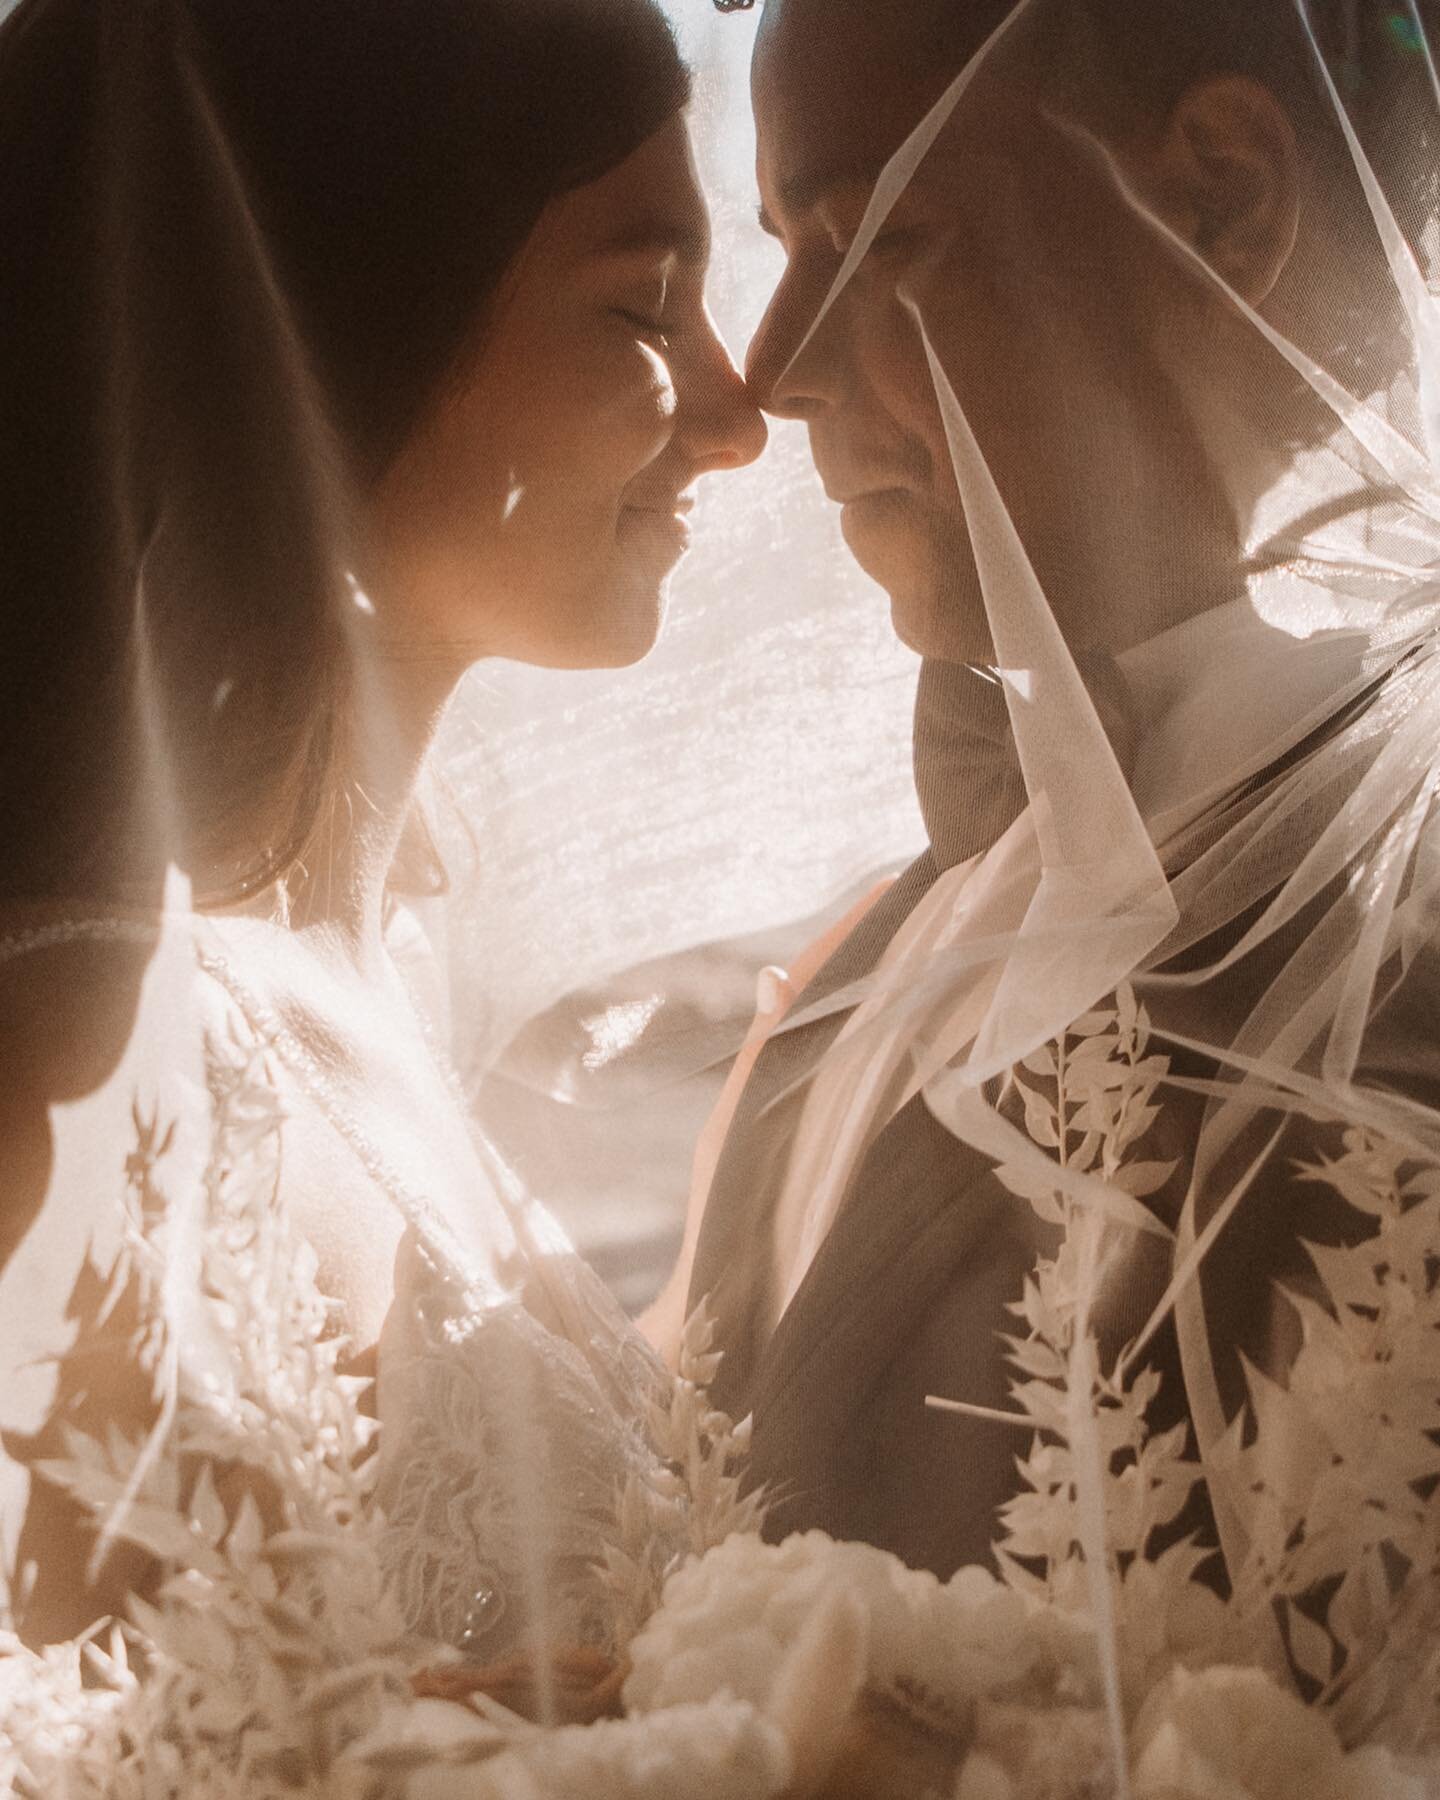 The magical moments under the veil are timeless 🤍 If you are unsure if a veil is for you, we recommend trying different styles as you try on wedding gowns to complete your fairytale look 👰🏻&zwj;♀️🏰 

Venue @MHCEVENTSPACE 
Photographer @KIMBERLIEM